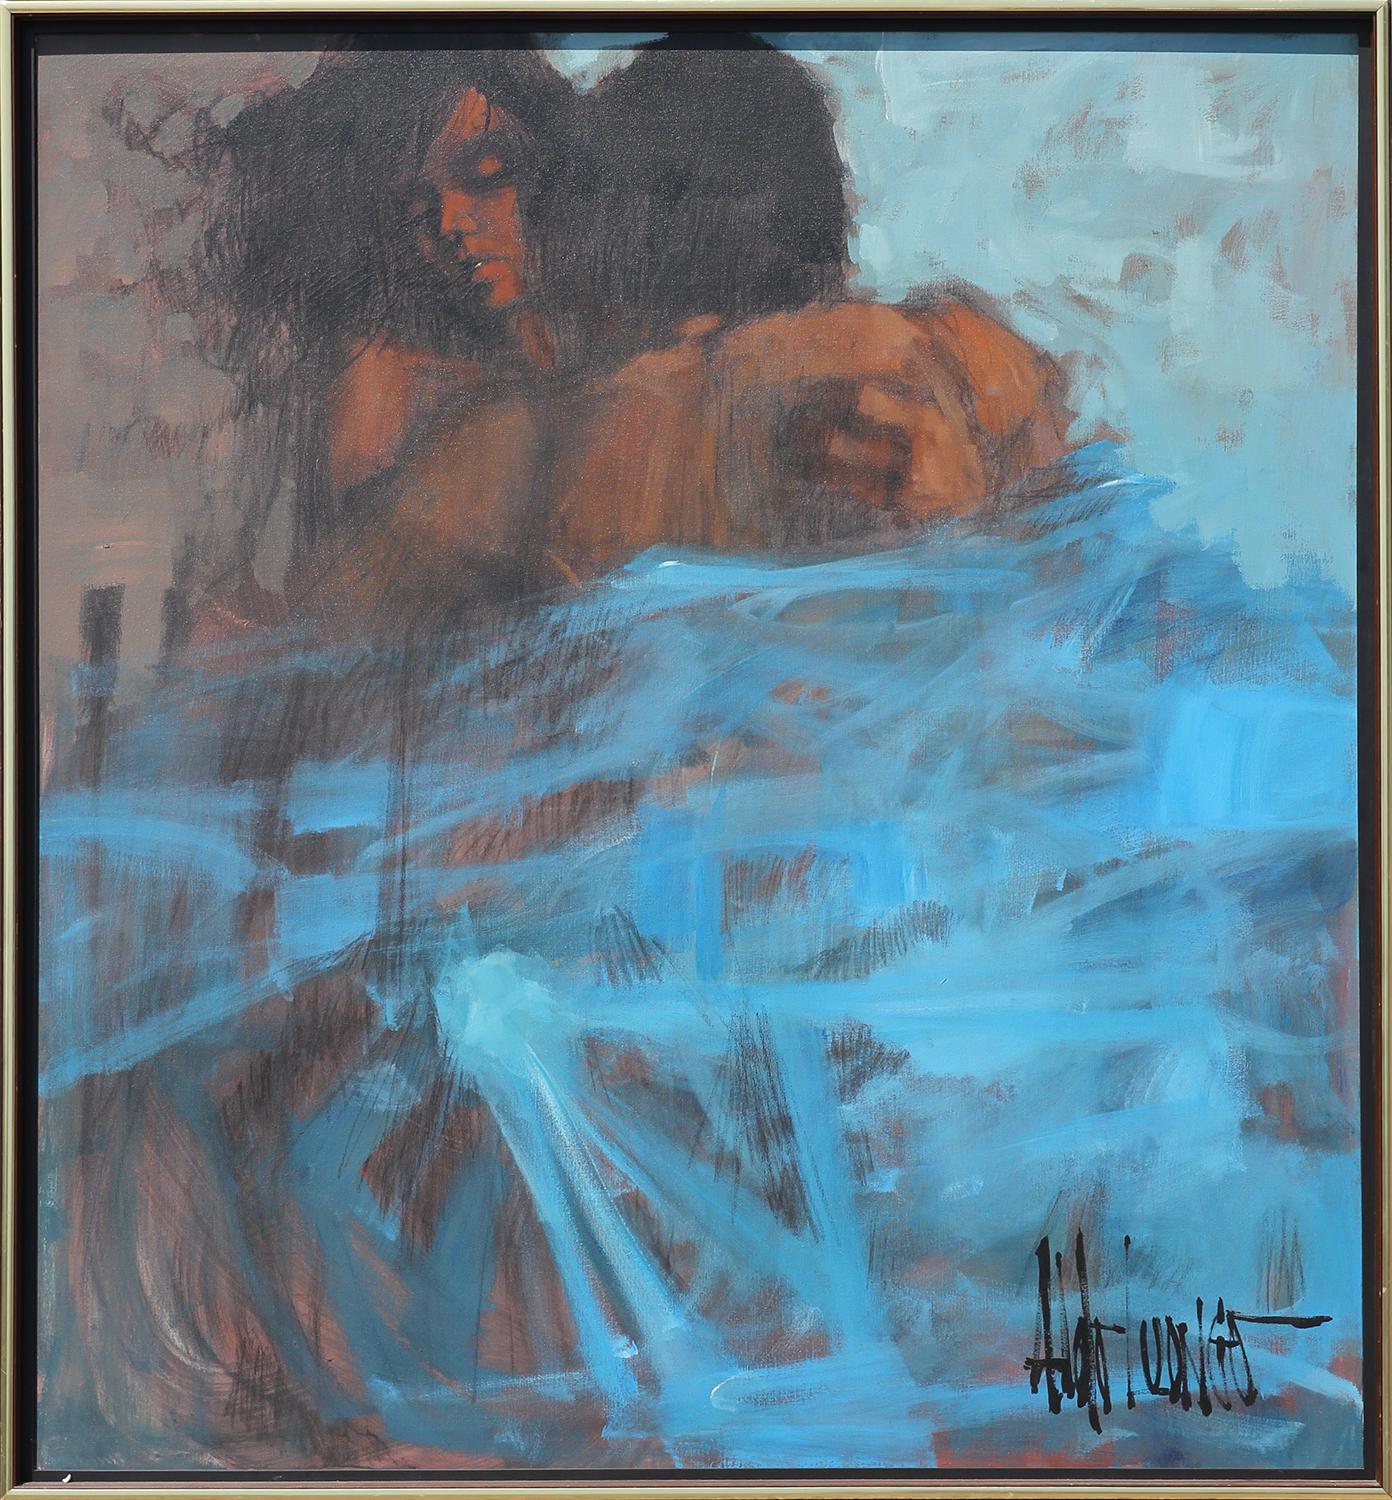 Aldo Luongo Figurative Painting - Large Blue and Brown Toned Abstract Figurative Couple Mixed Media Painting